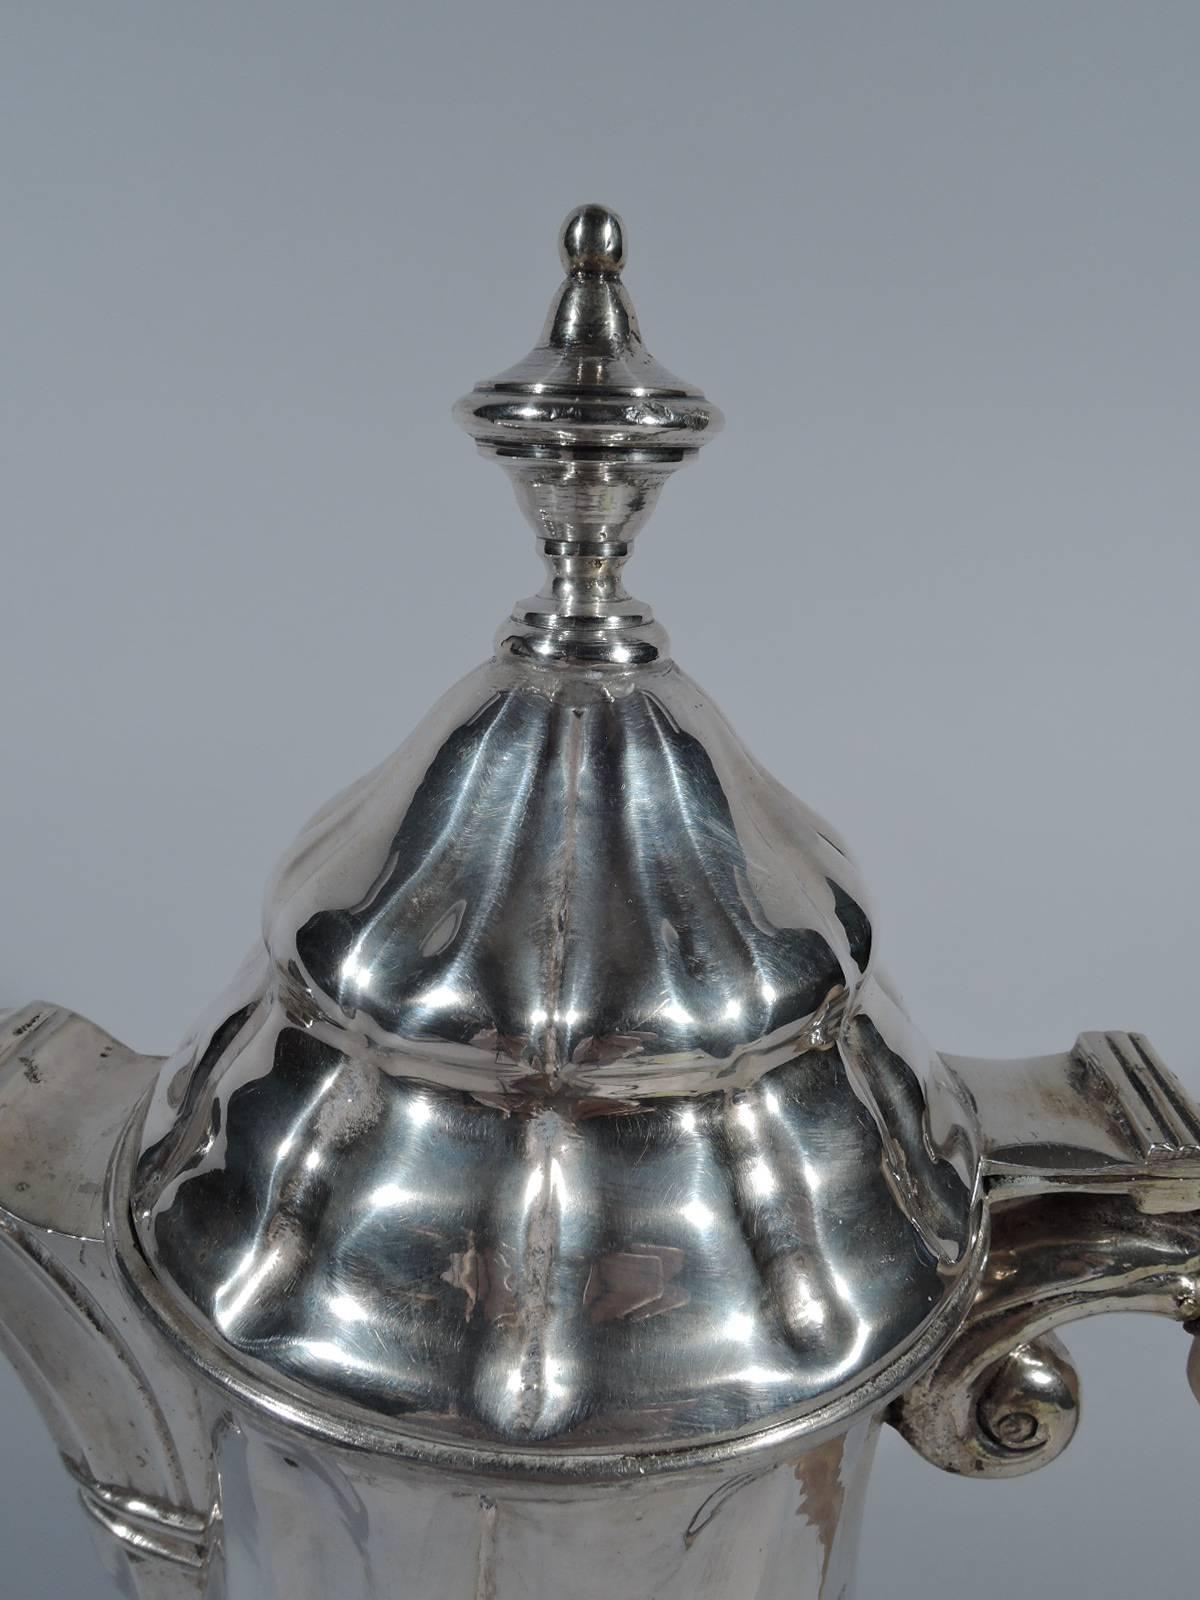 Antique Italian silver coffeepot in 18th century style. Baluster on raised foot, crescent spout, hinged double-dome cover with finial, and capped s-scroll wood handle with silver scroll mounts. Fluting. Visible hand hammering. Nice craftsmanship in